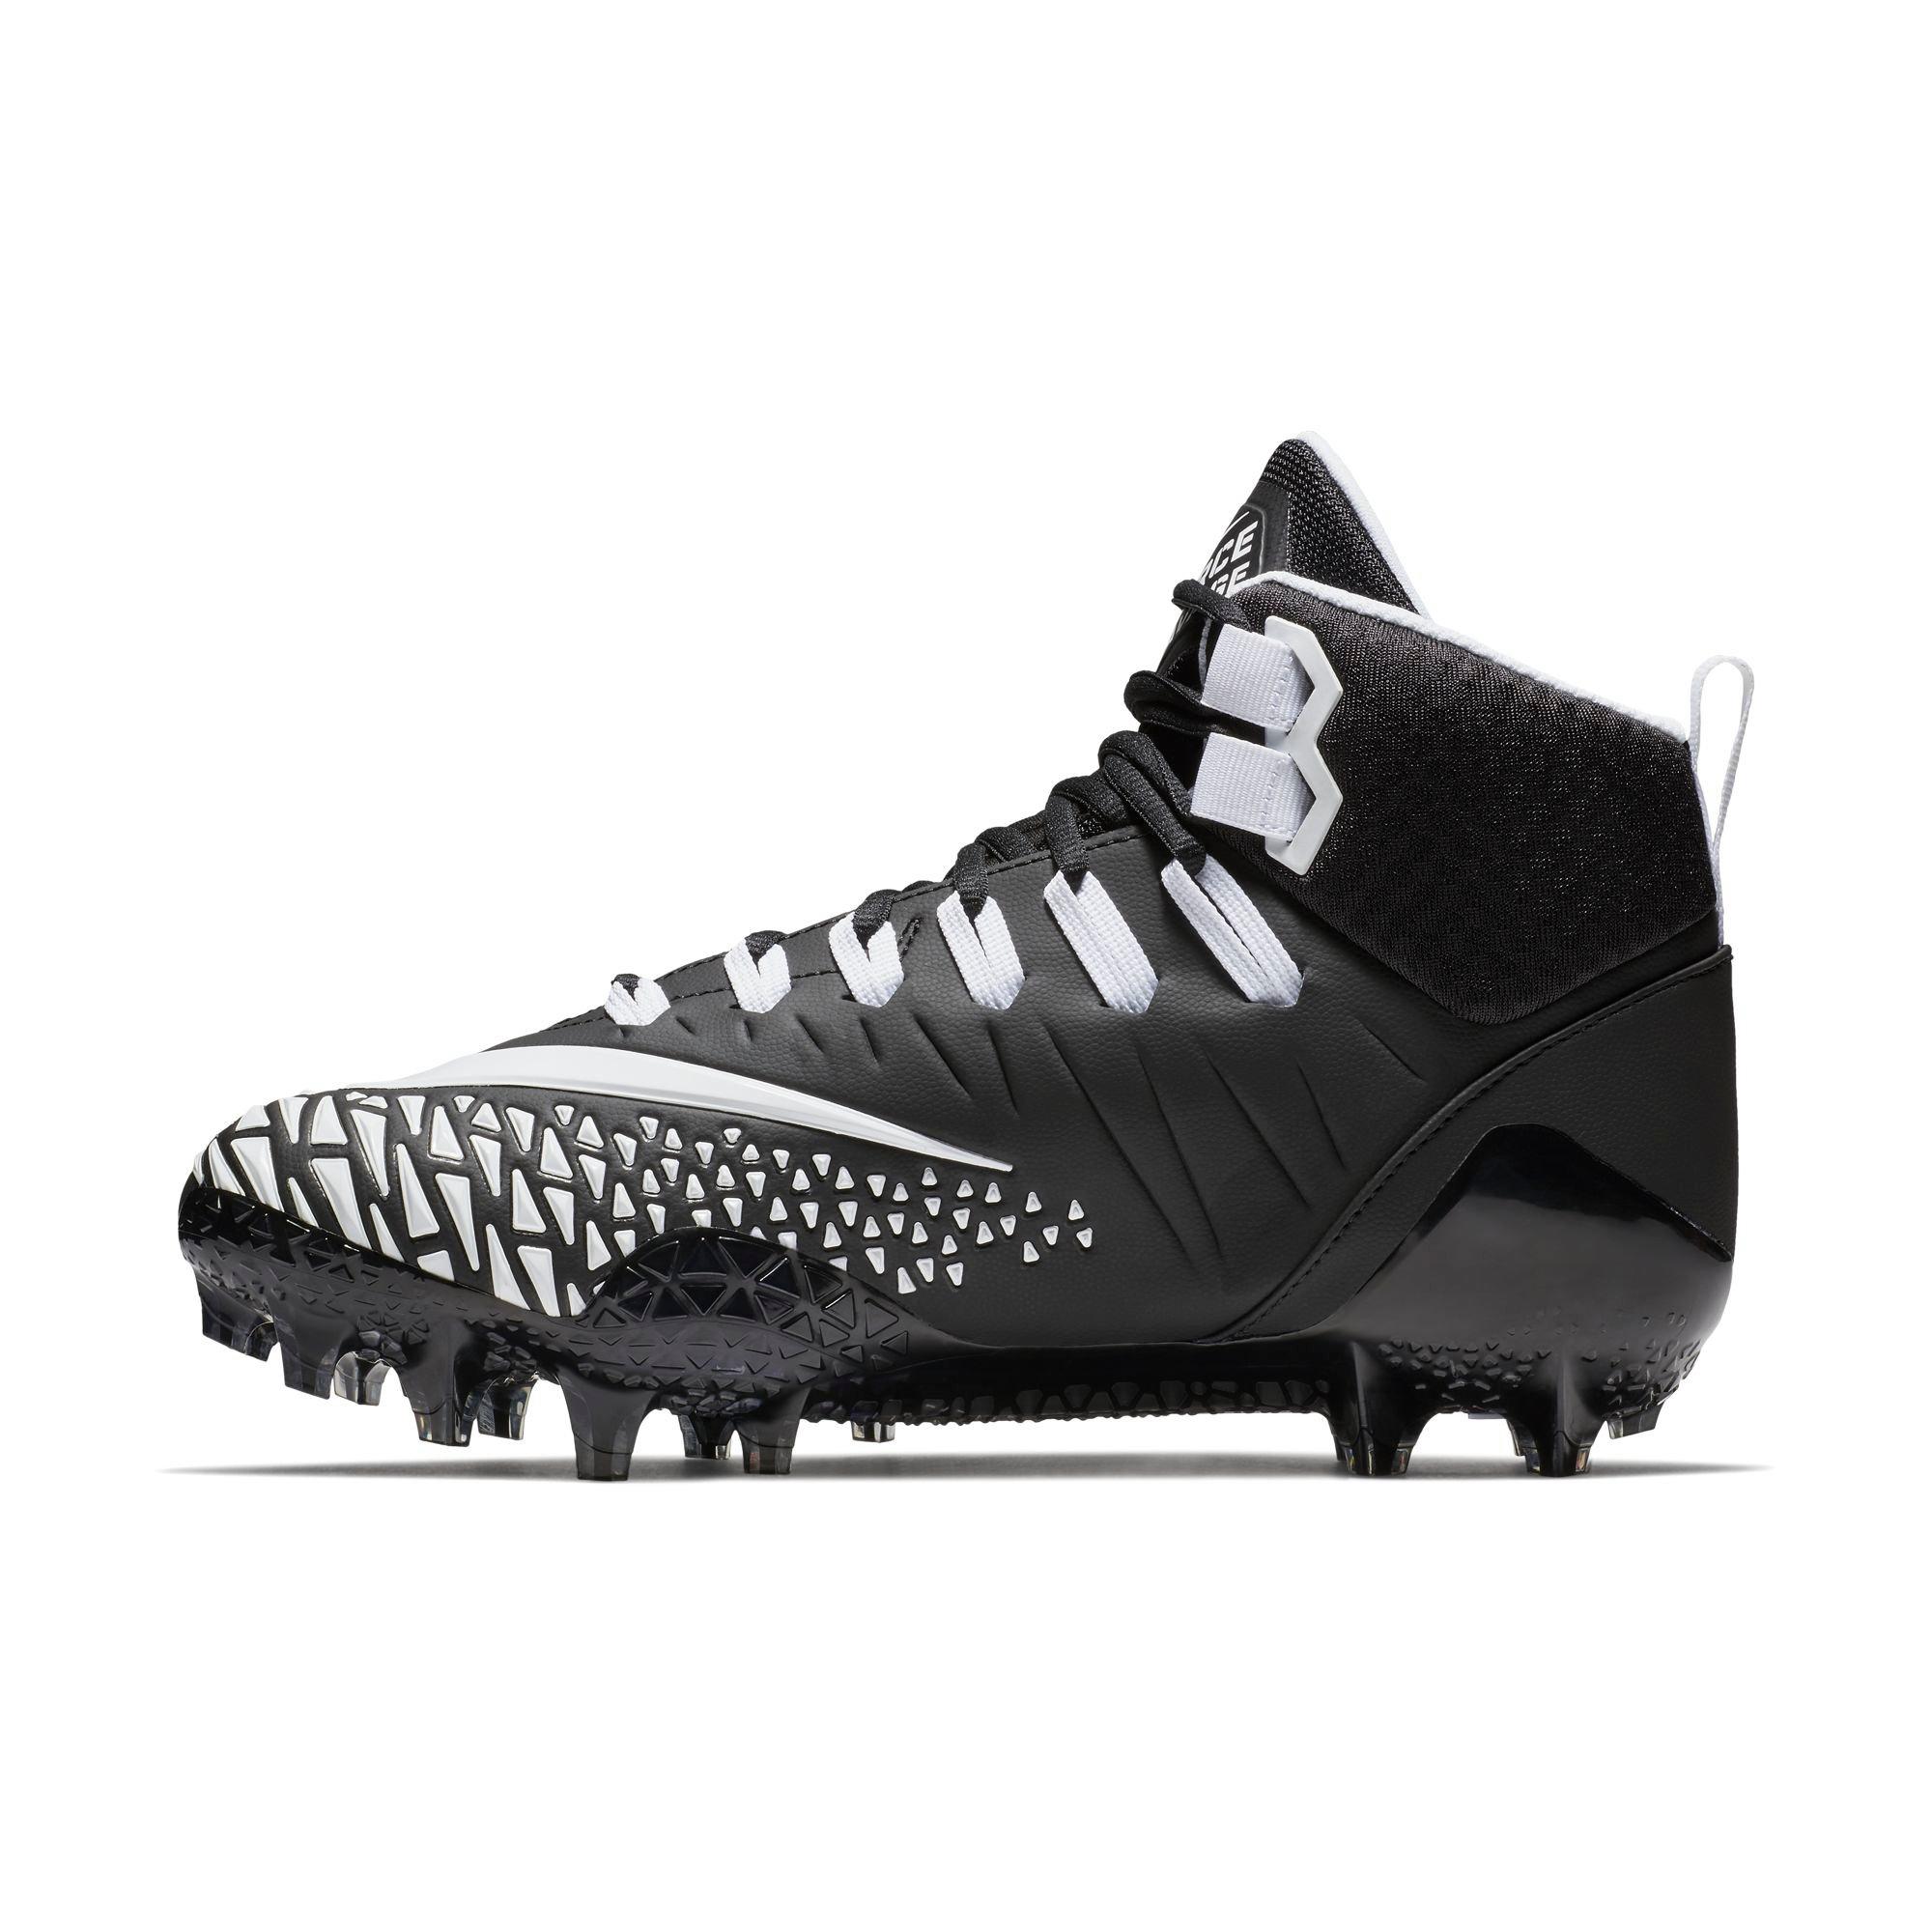 nike men's force savage pro football cleats